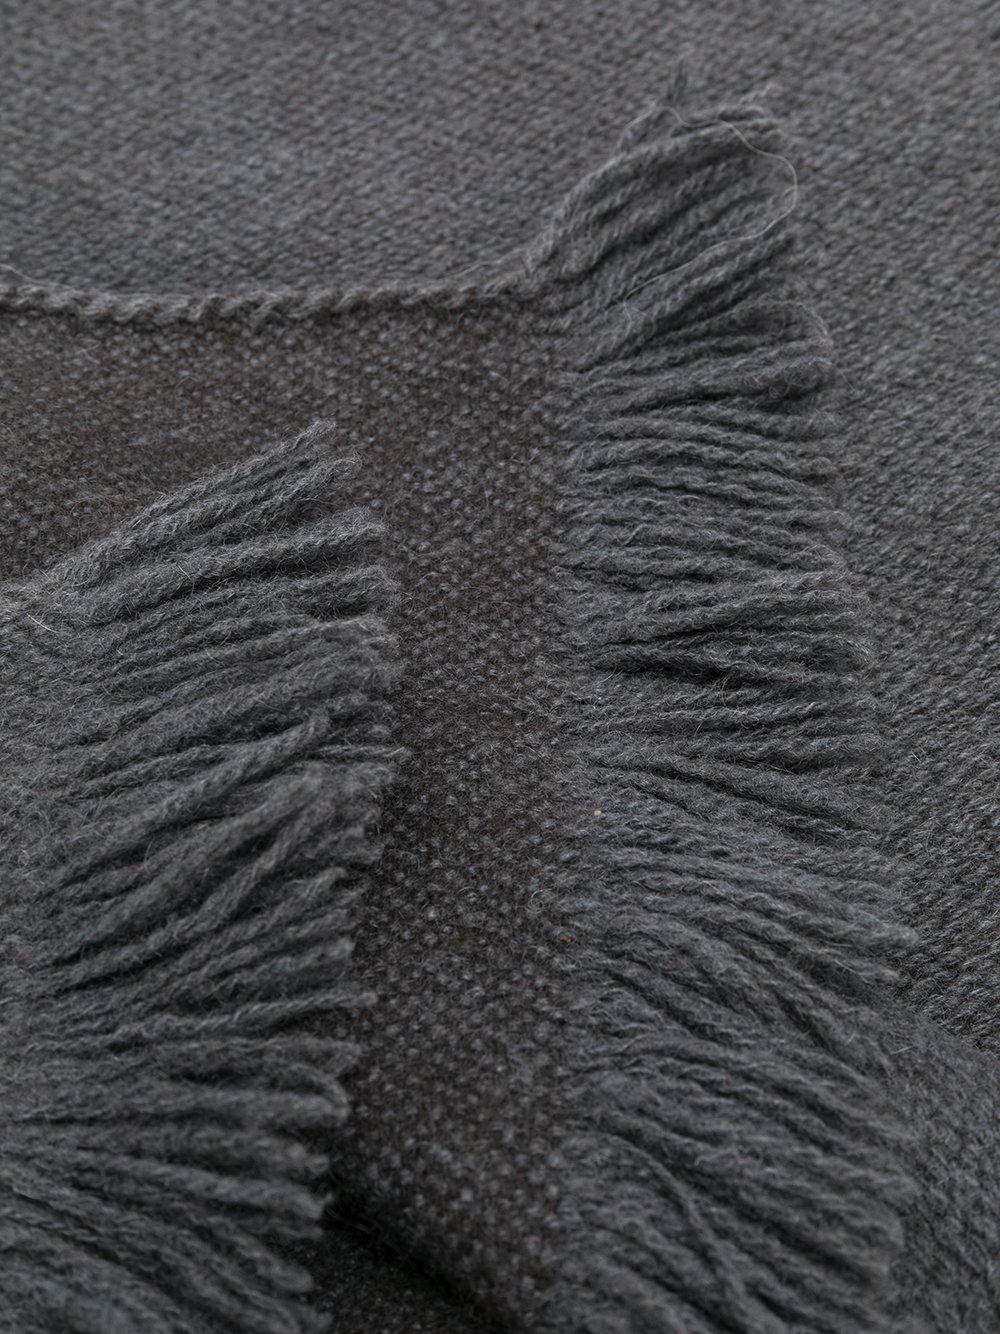 Both casual and practical, this timeless scarf, fashioned from sumptuous yak wool,  presents a long rectangular silhouette in a neutral palette of charcoal, tin and black, finished with delicate fringing.

This bag comes in its original Hermès